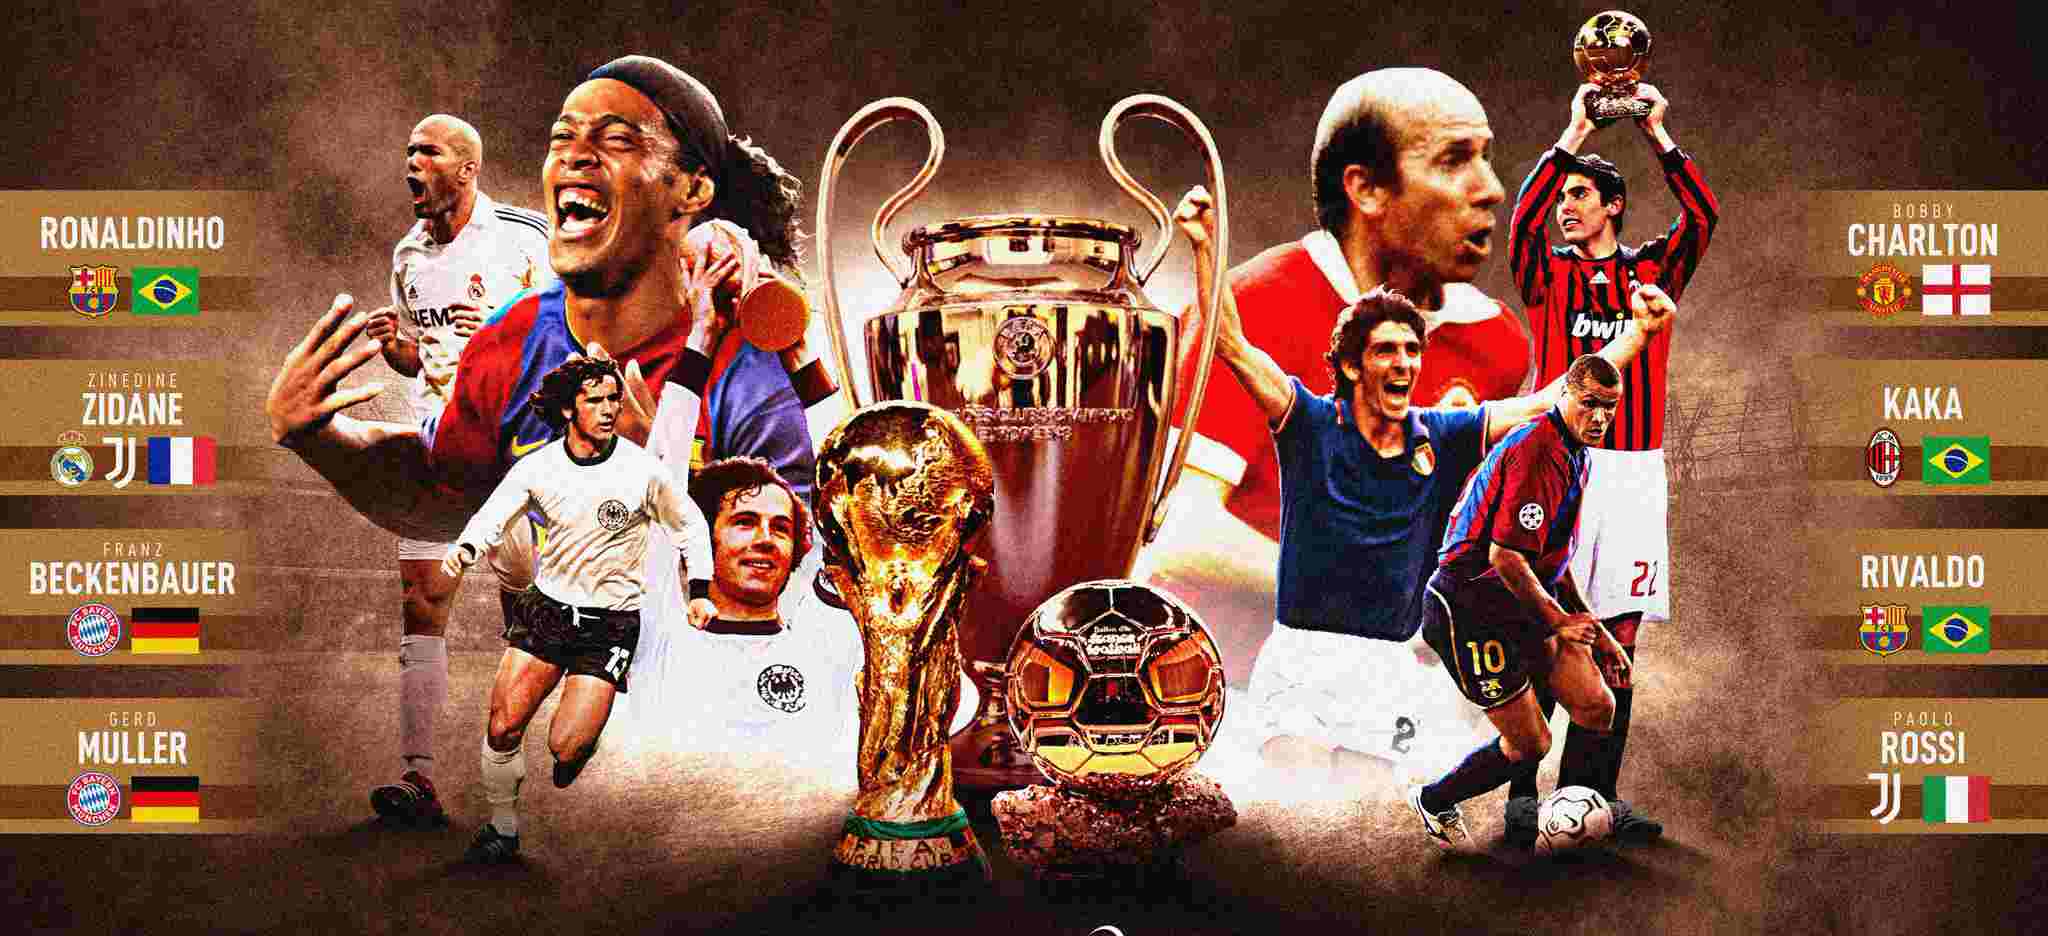 9 Footballers That Have Won The FIFA World Cup, Ballon d’Or and The UEFA Champions League